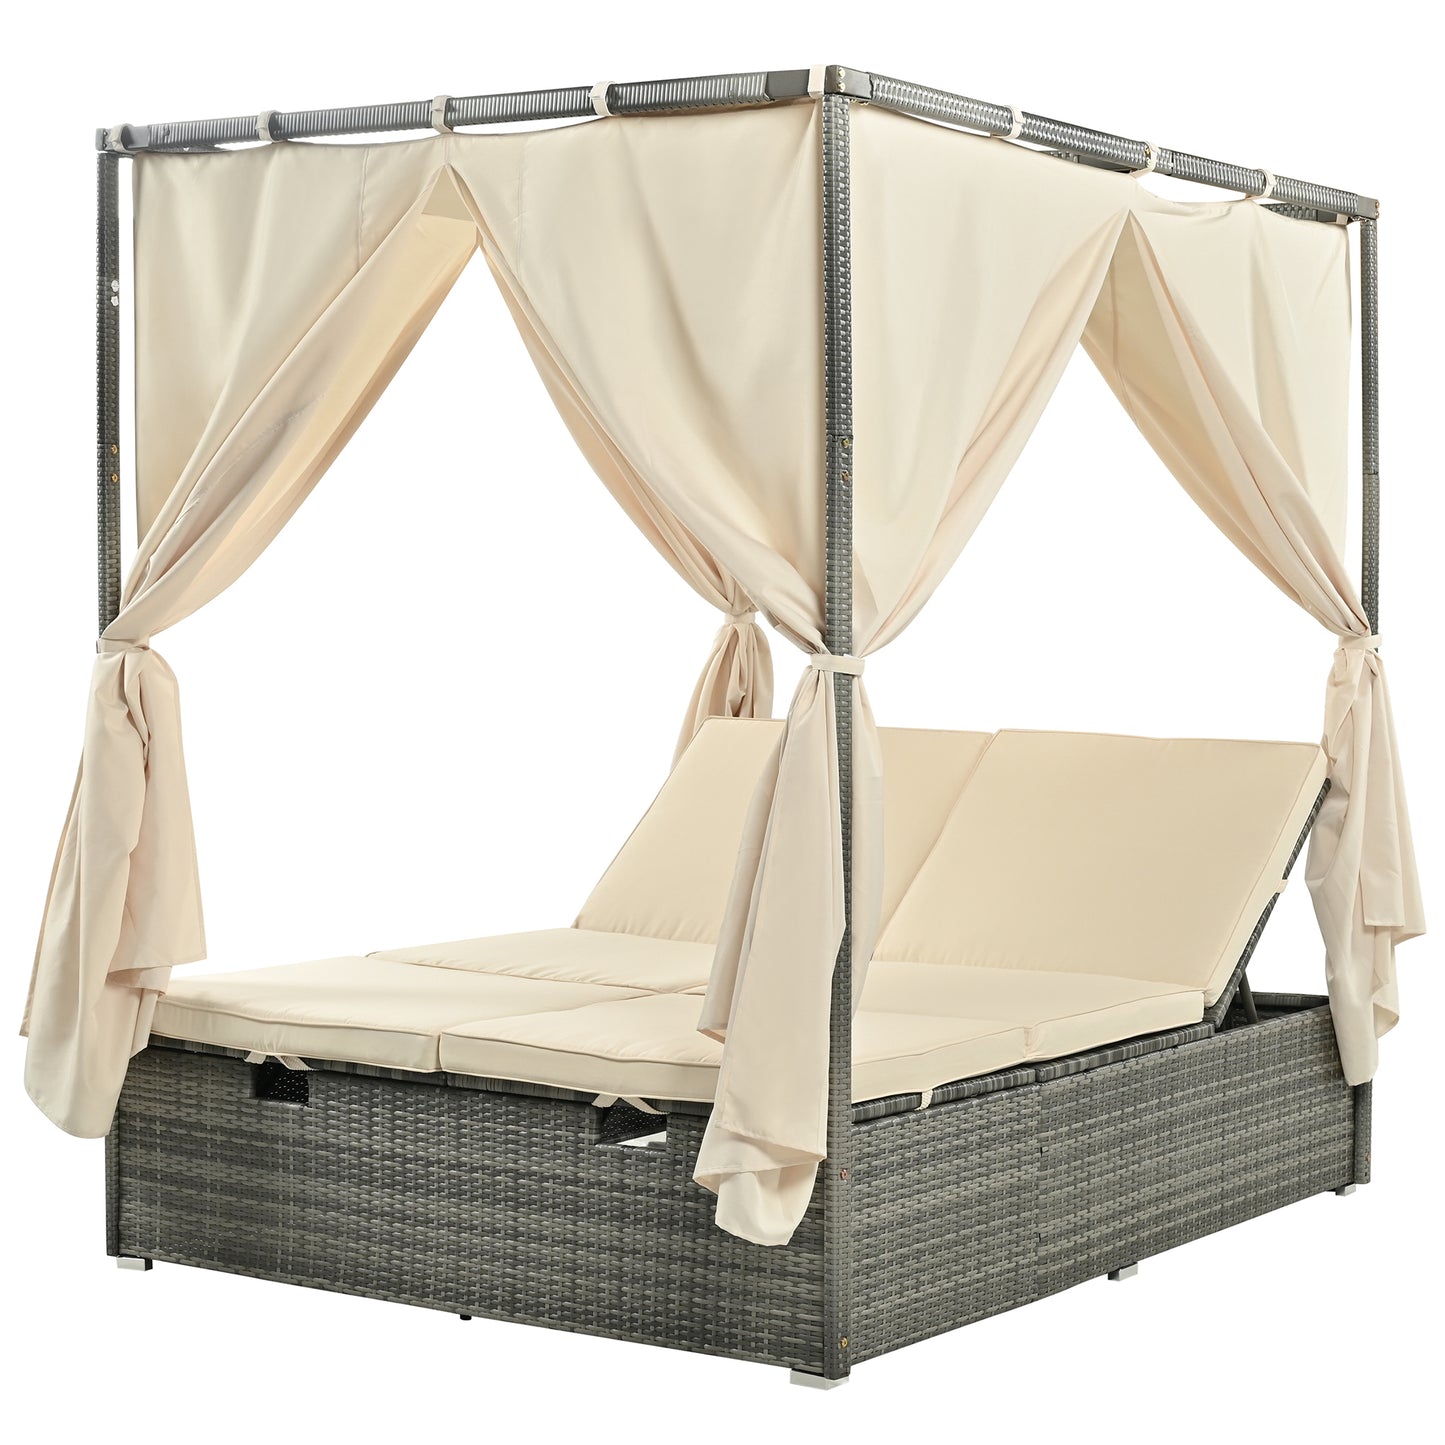 U_Style Adjustable Sun Bed With Curtain, High Comfort